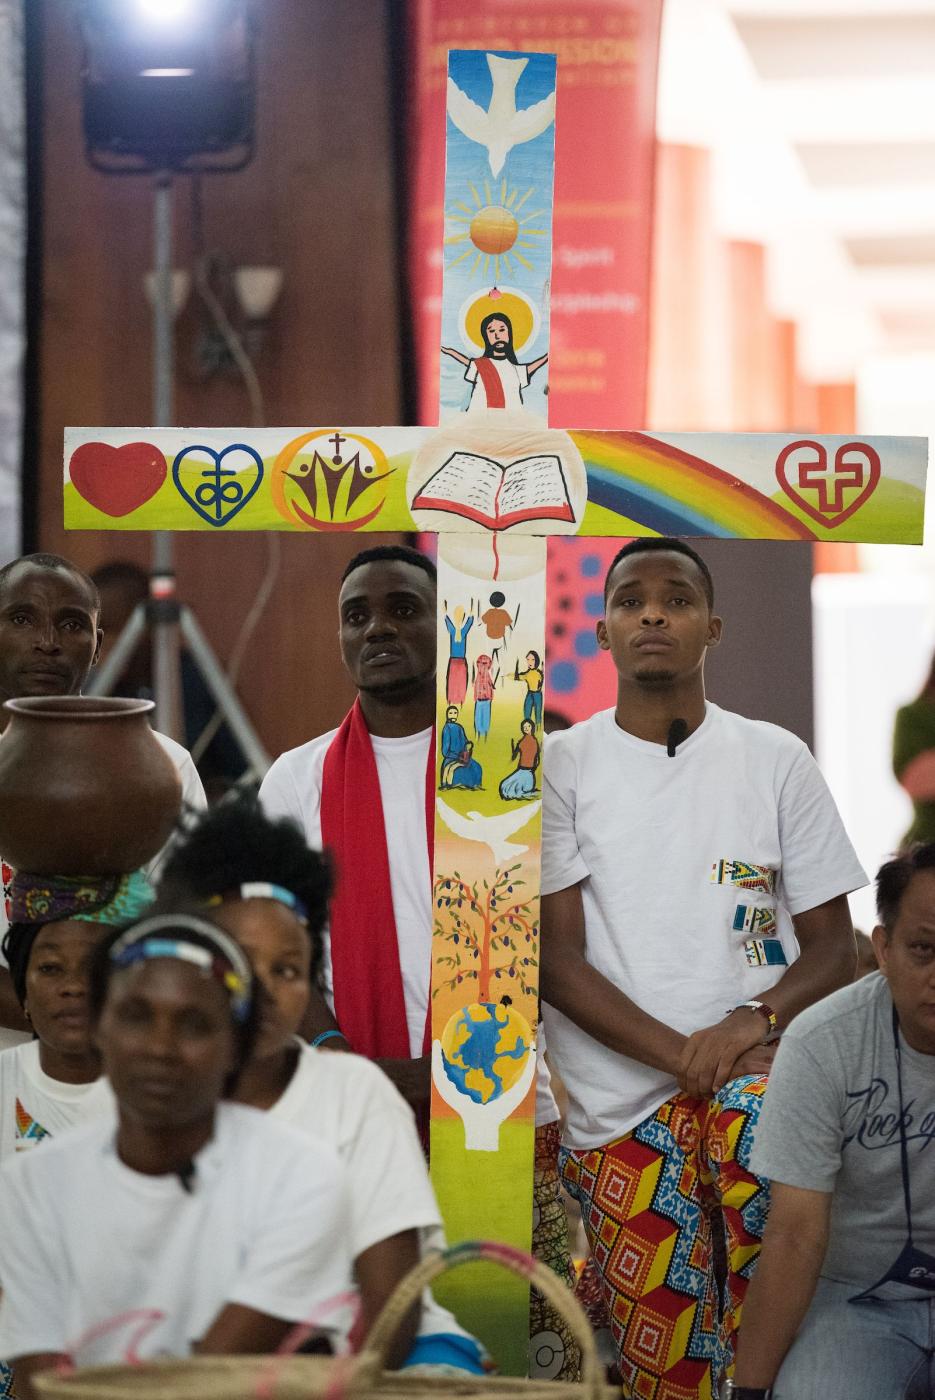 Conference on World Mission and Evangelism, Arusha, Tanzania, 2018, Photo: Albin Hillert/WCC